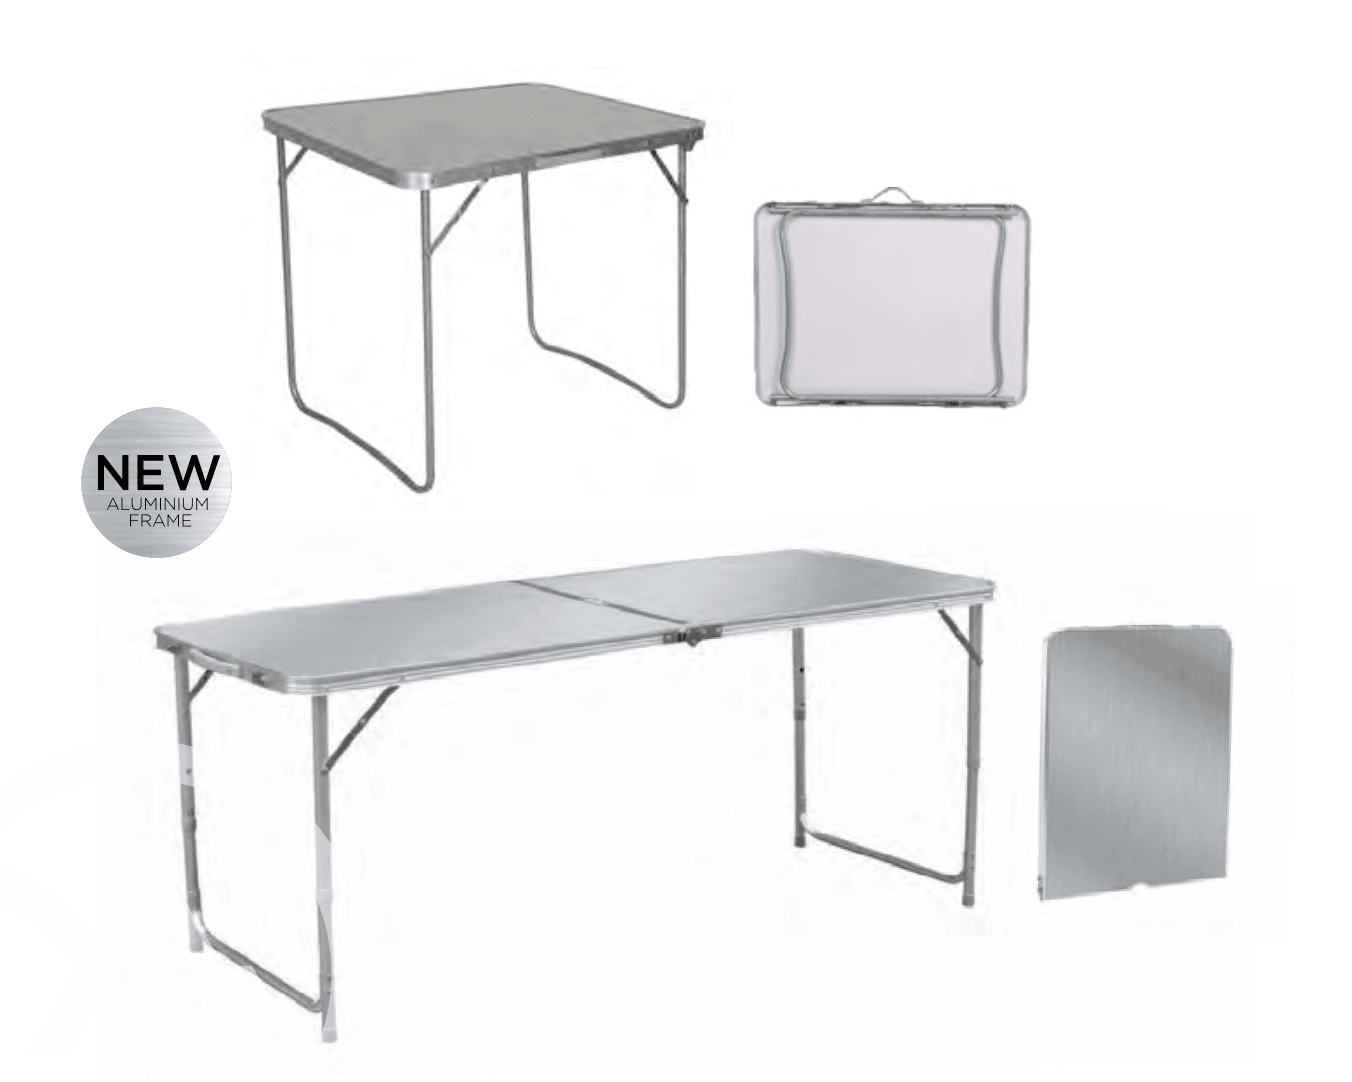 Discovery Folding Table - BBQ DXB